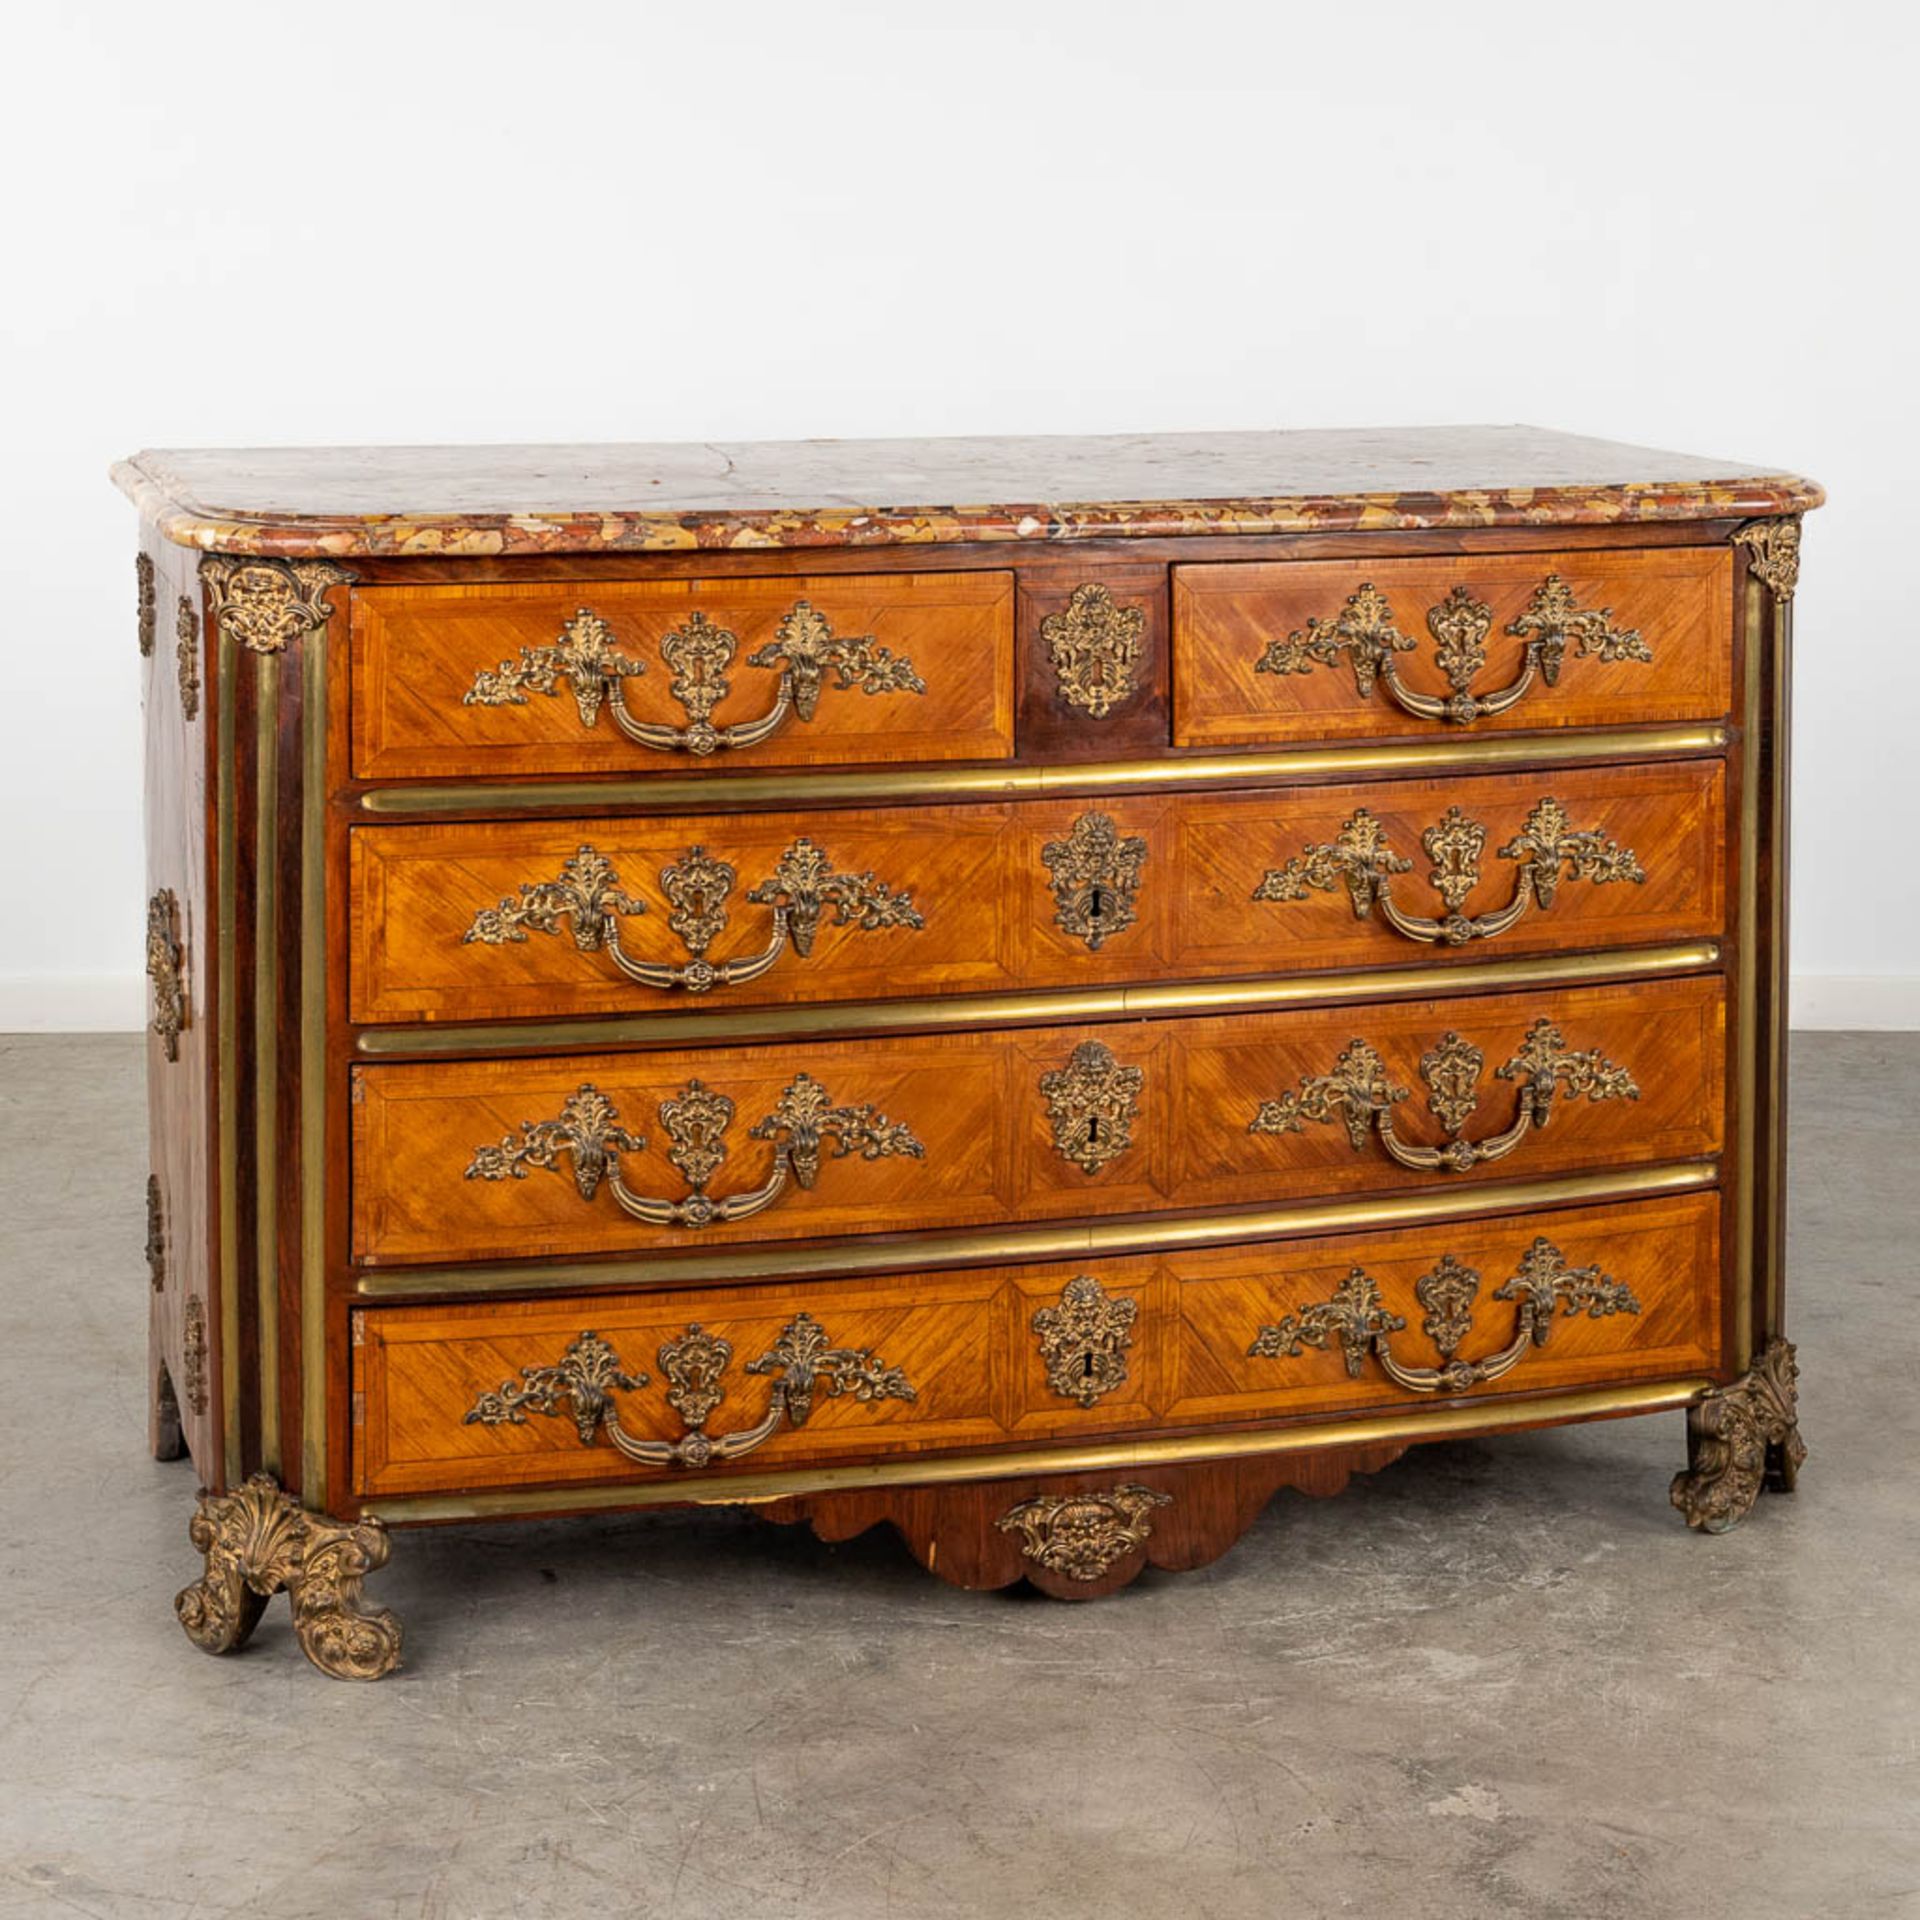 Louis Simon PAINSUN (?-1748) an exceptional 5-drawer commode, bronze and marquetry with Brech D'Alep